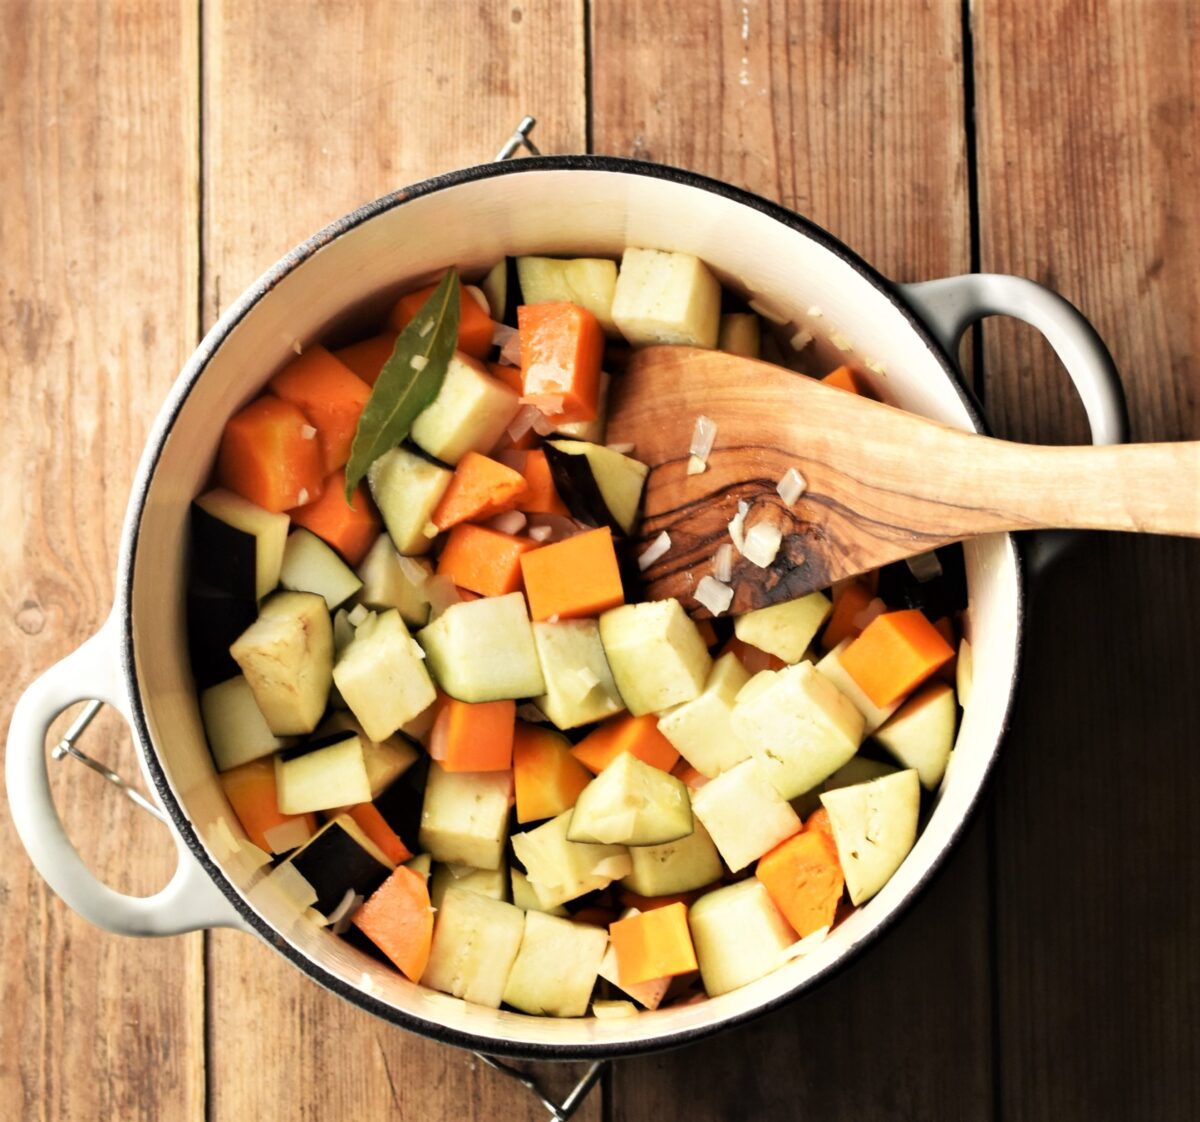 Cubed squash and eggplant in large white pot with wooden spoon.